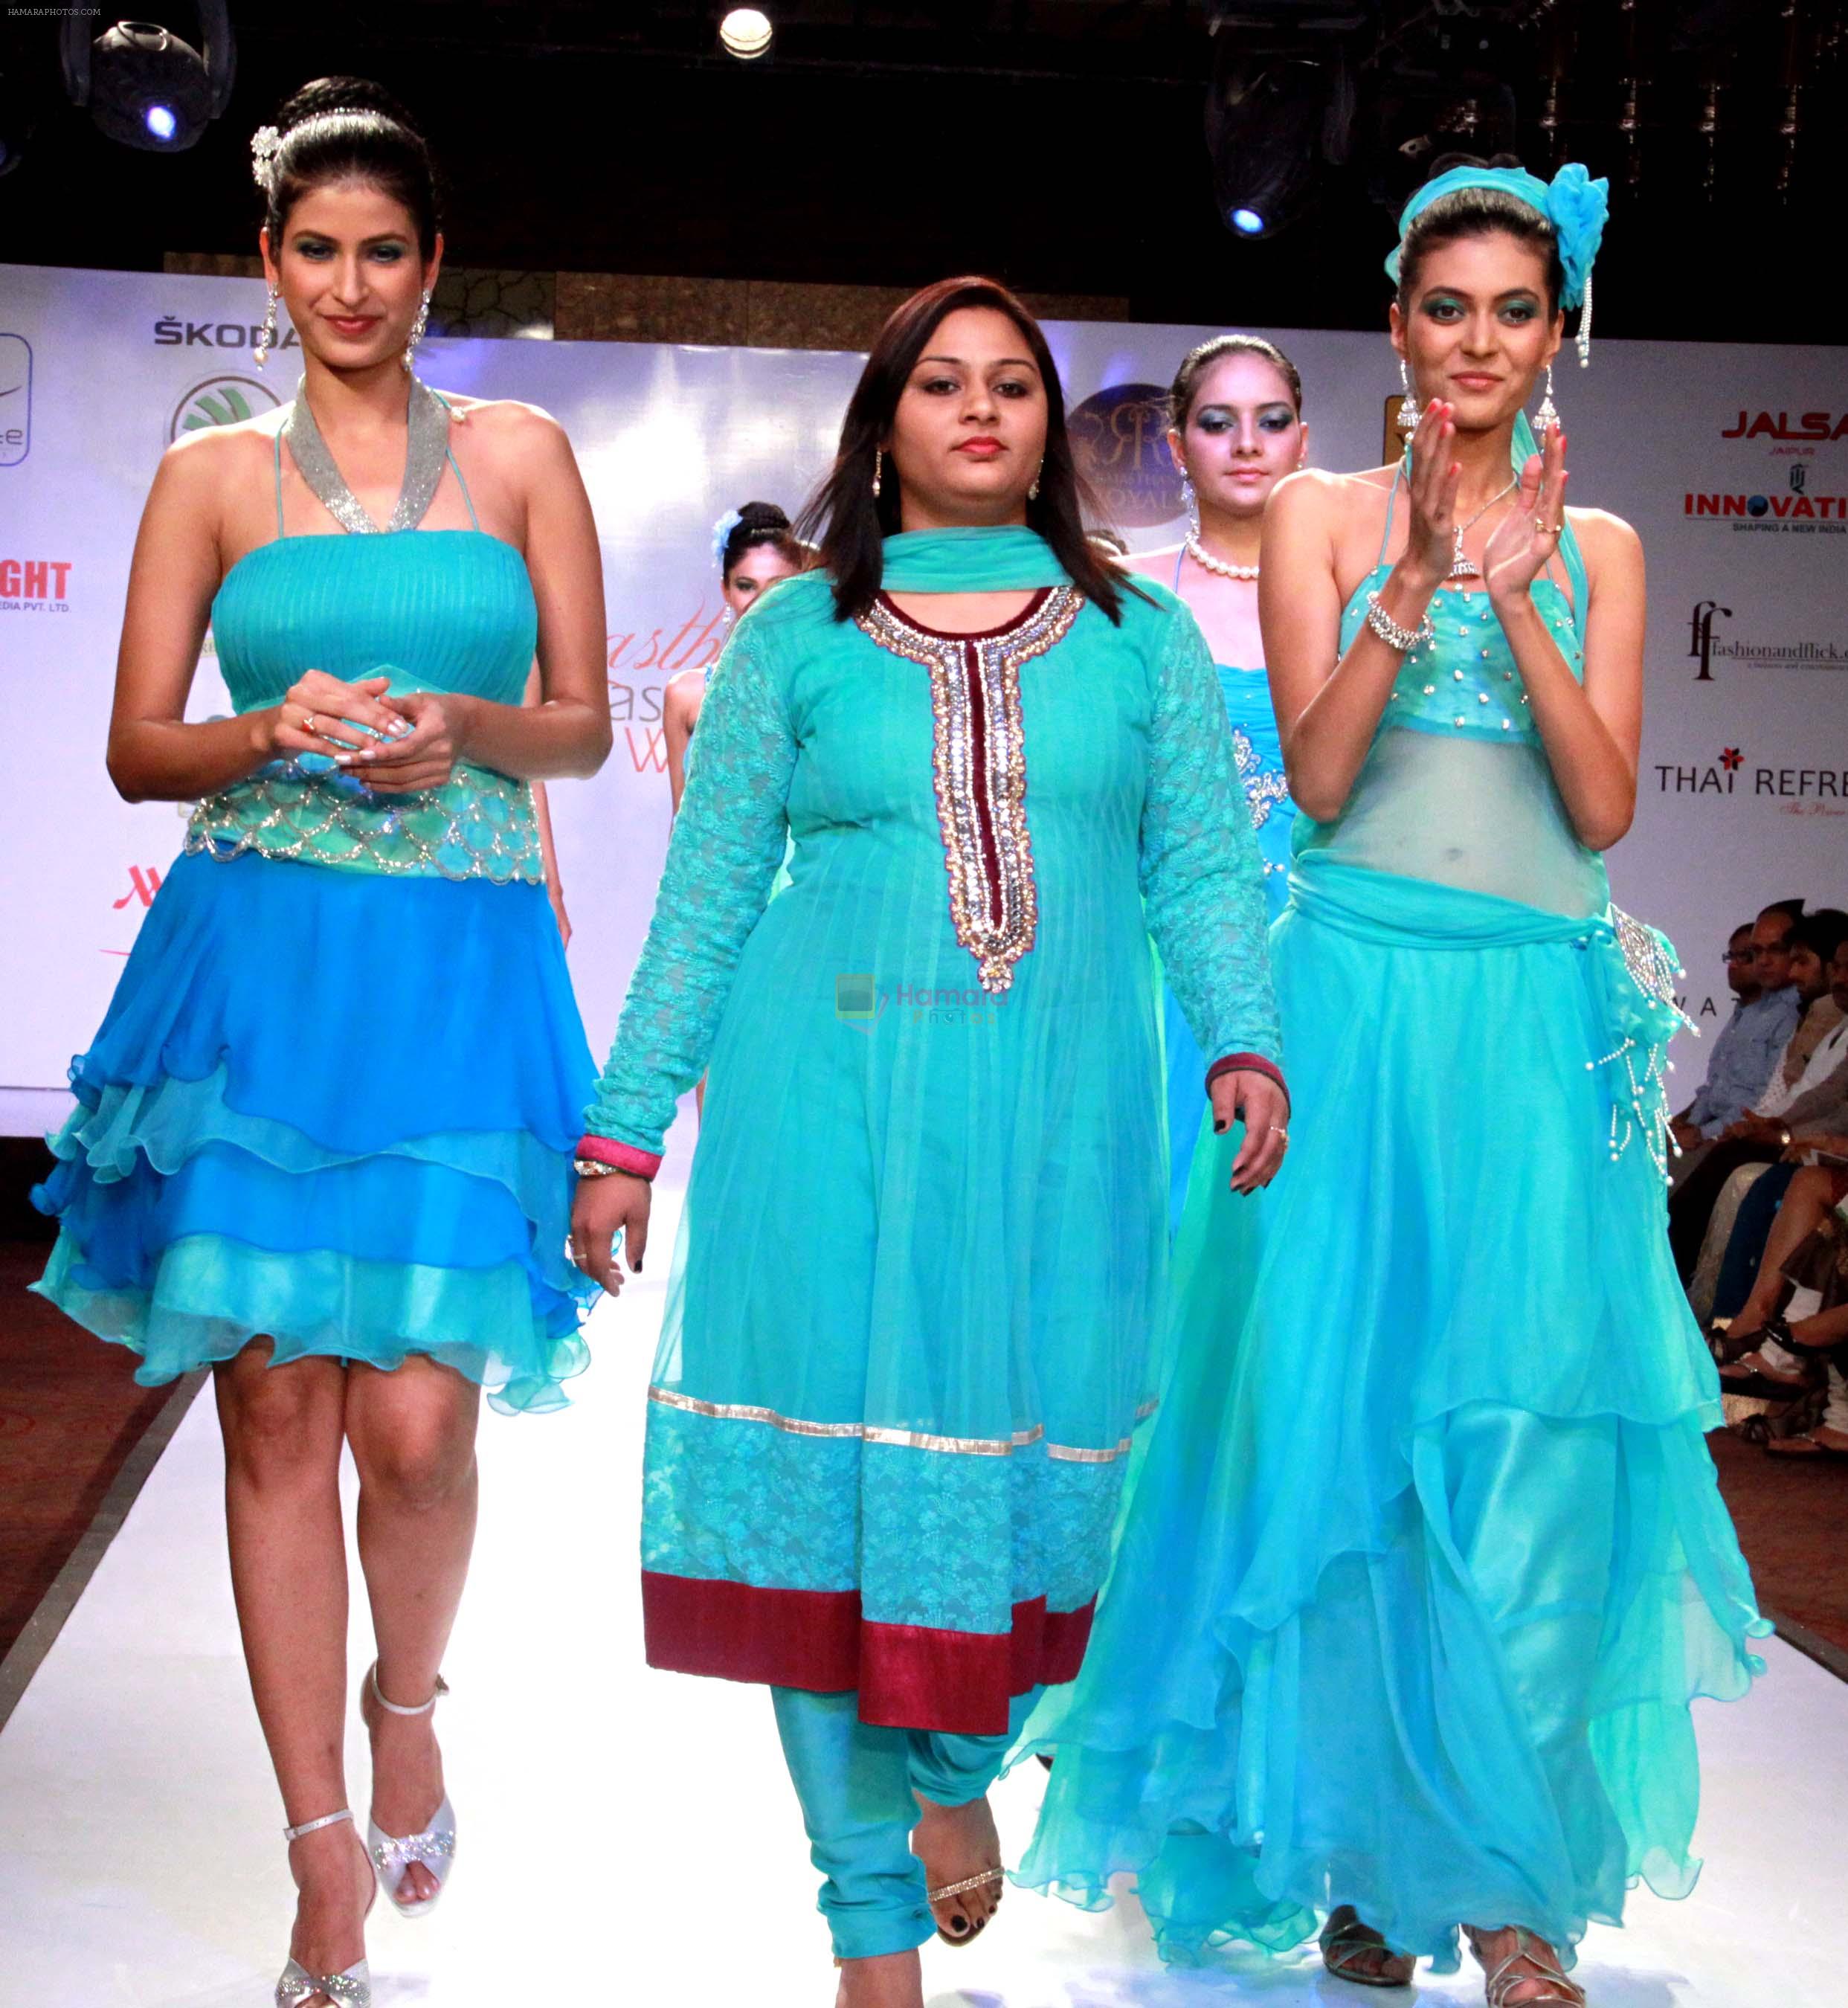 sunita with models on second day of Rajasthan Fashion Week at Jaipur Marriott on 25th May 2012